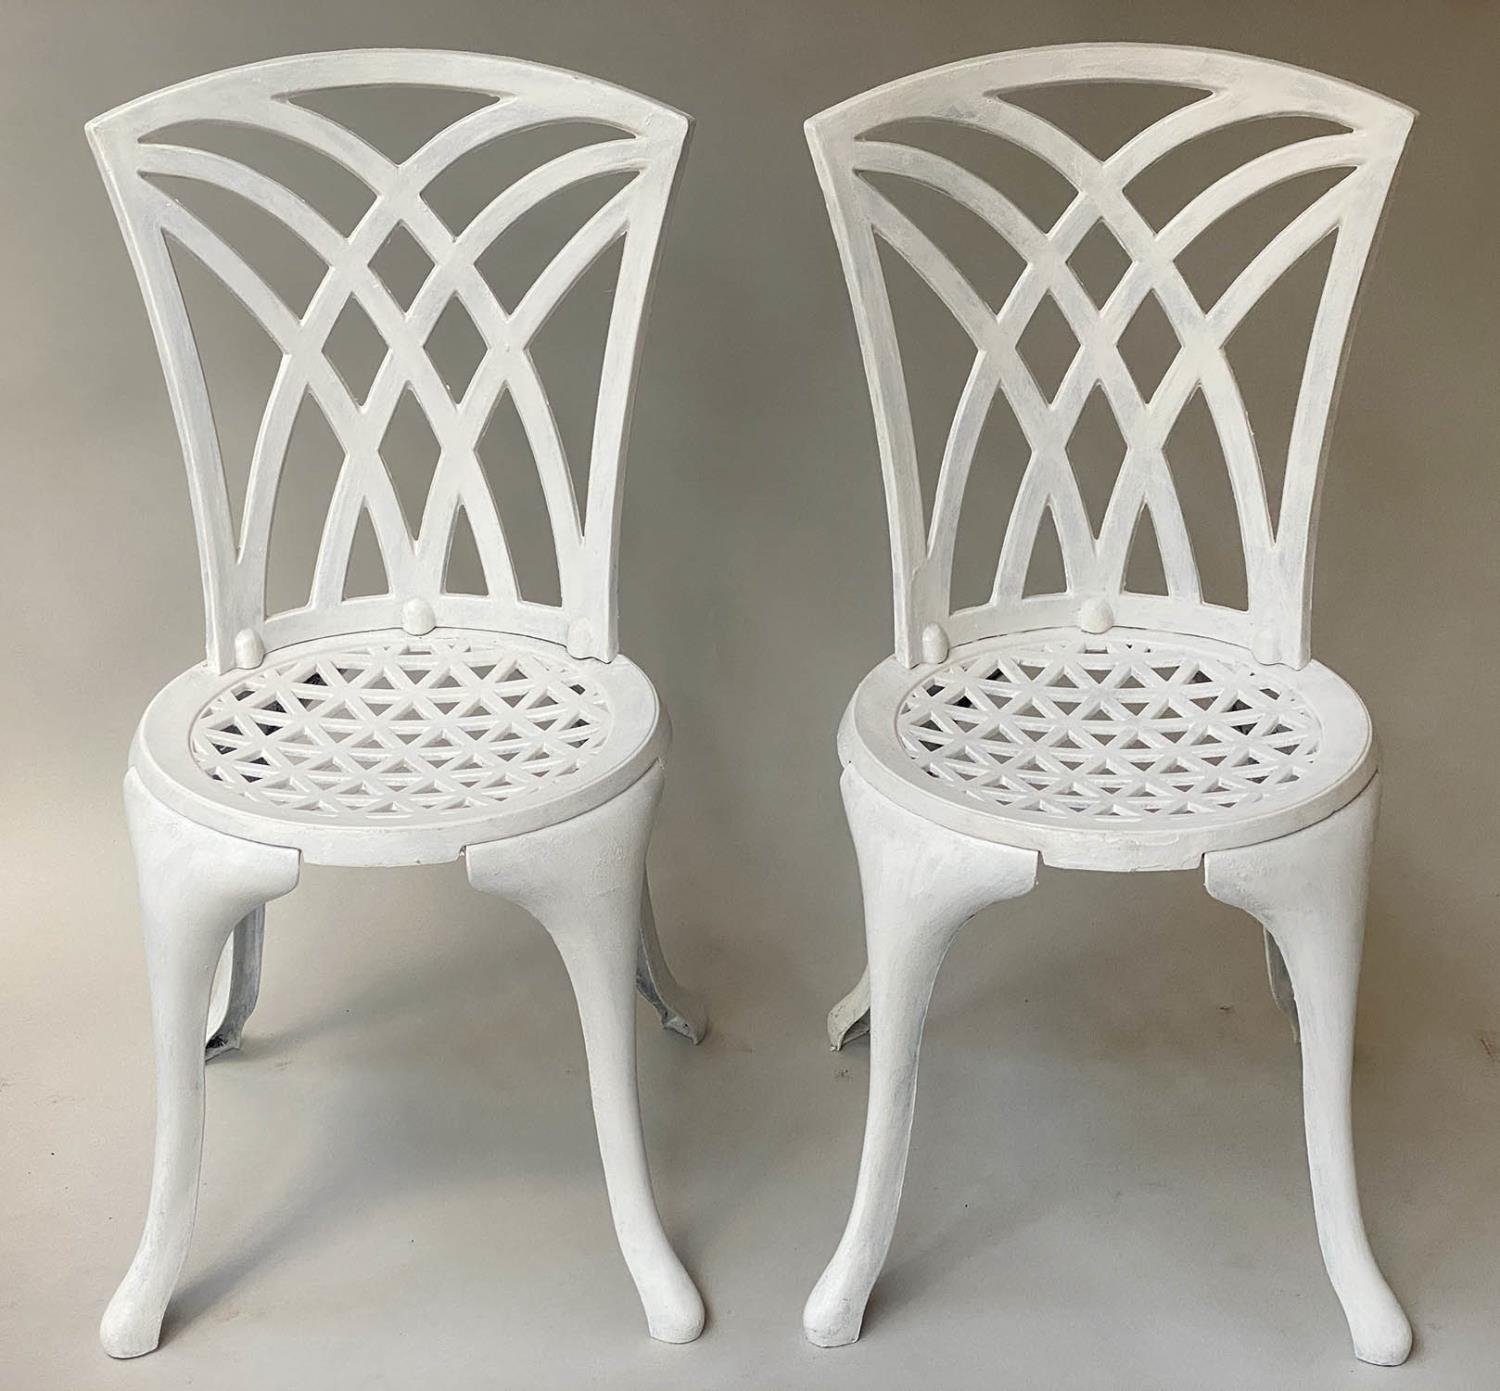 BALCONY/TERRACE SET, vintage mid 20th century French white painted wrought iron, circular pierced - Image 3 of 4